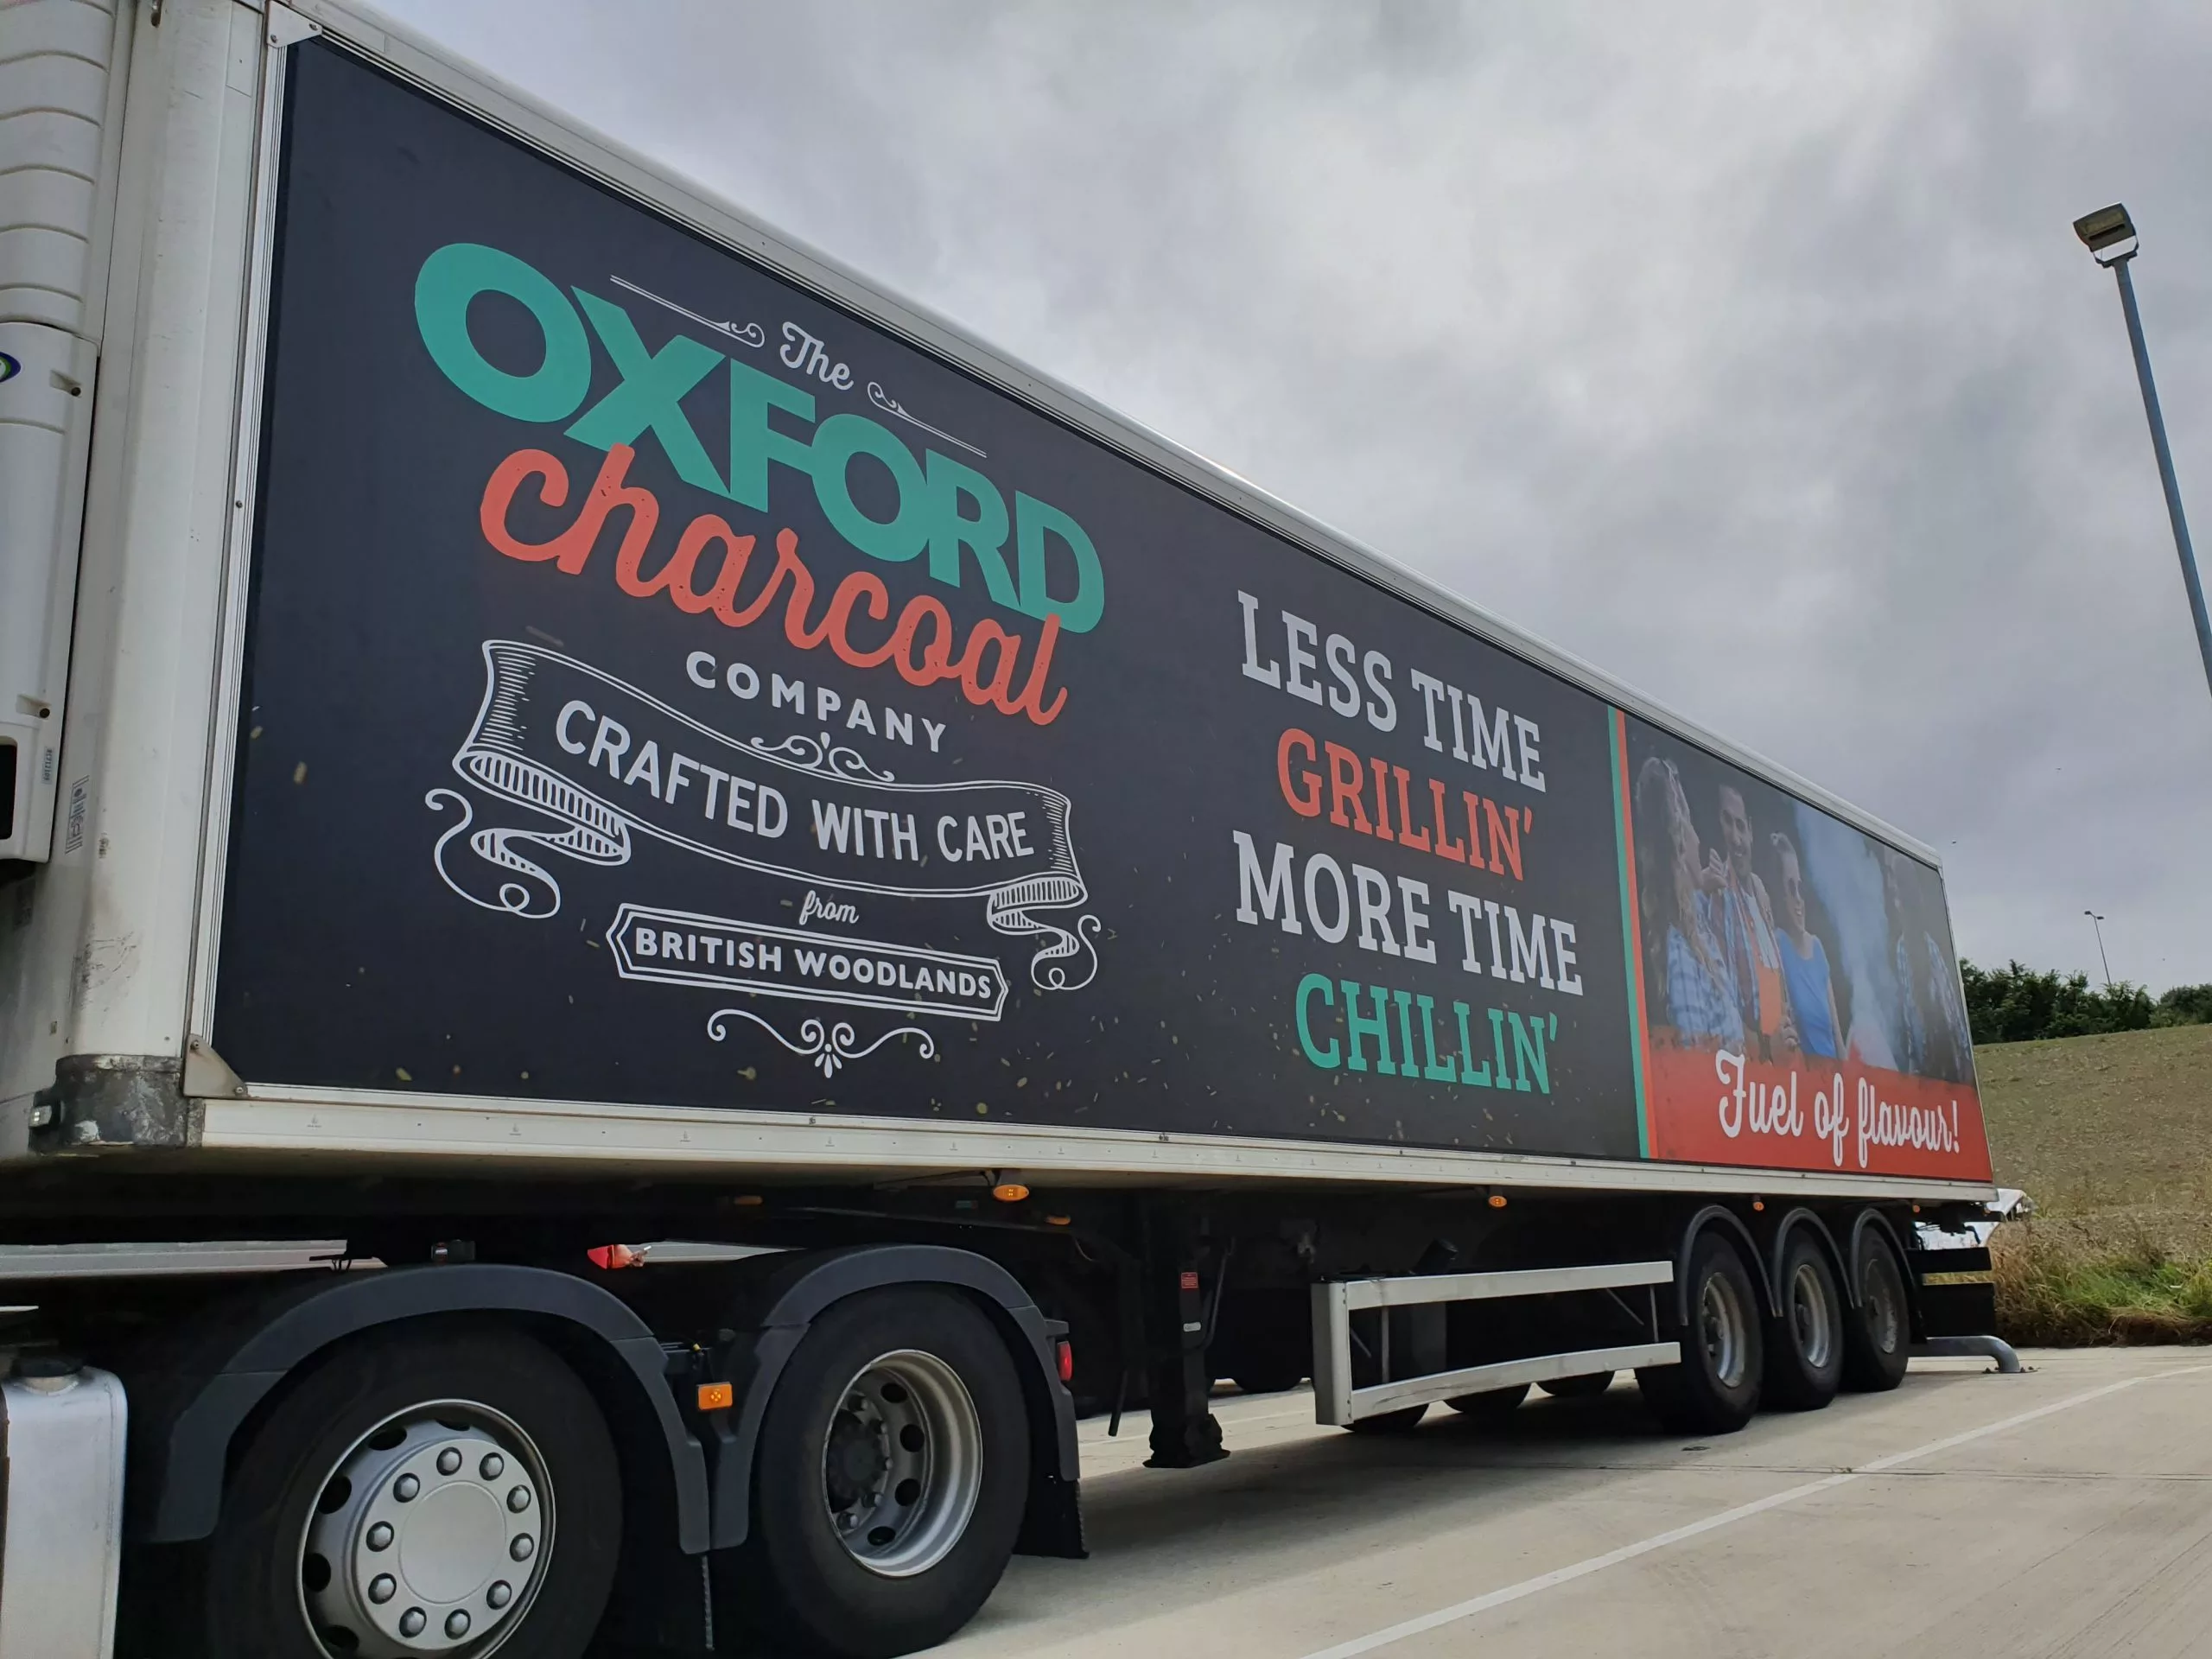 The Oxford Charcoal Company | Truck Advertising | UK